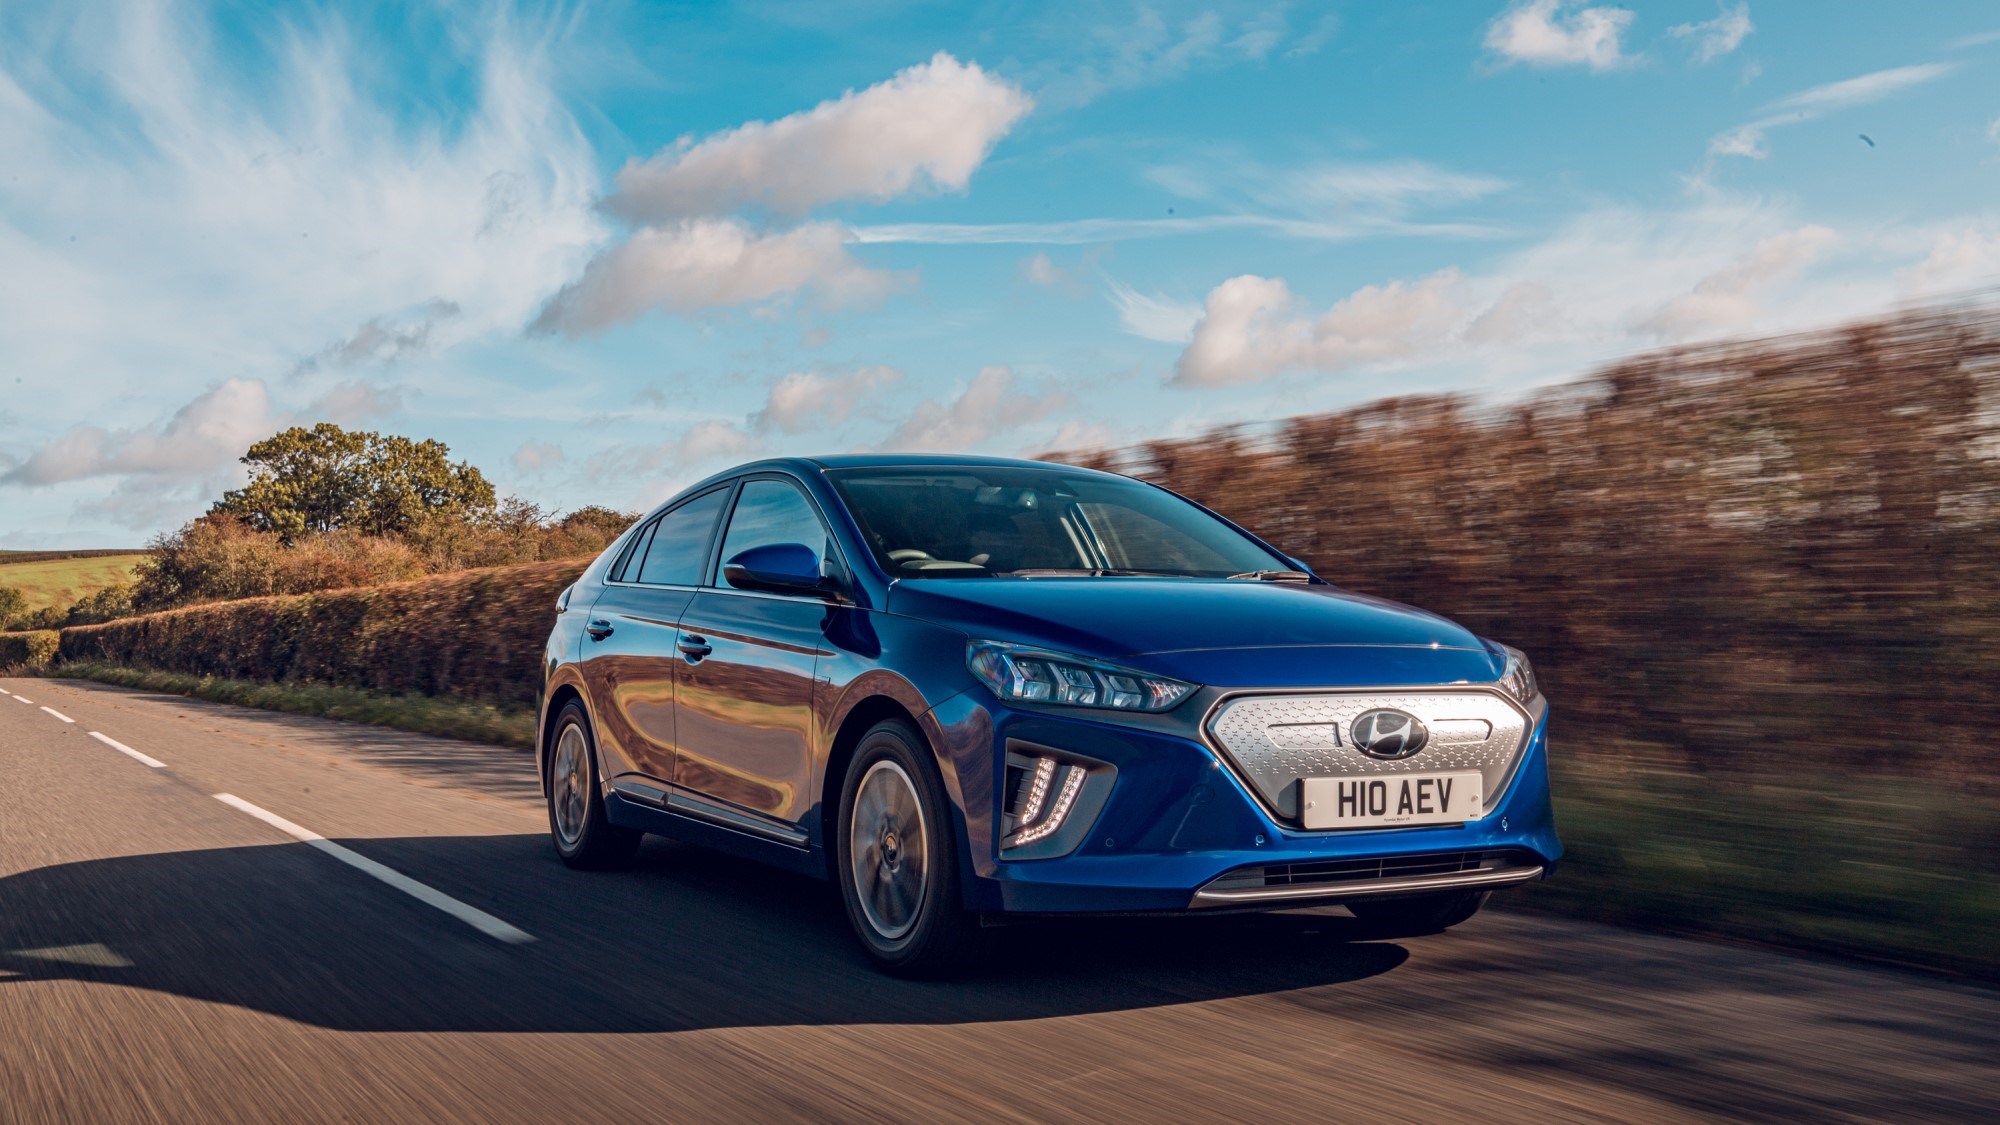 Facelifted 2020 Hyundai Ioniq Electric: Final Specs And New Photos Released